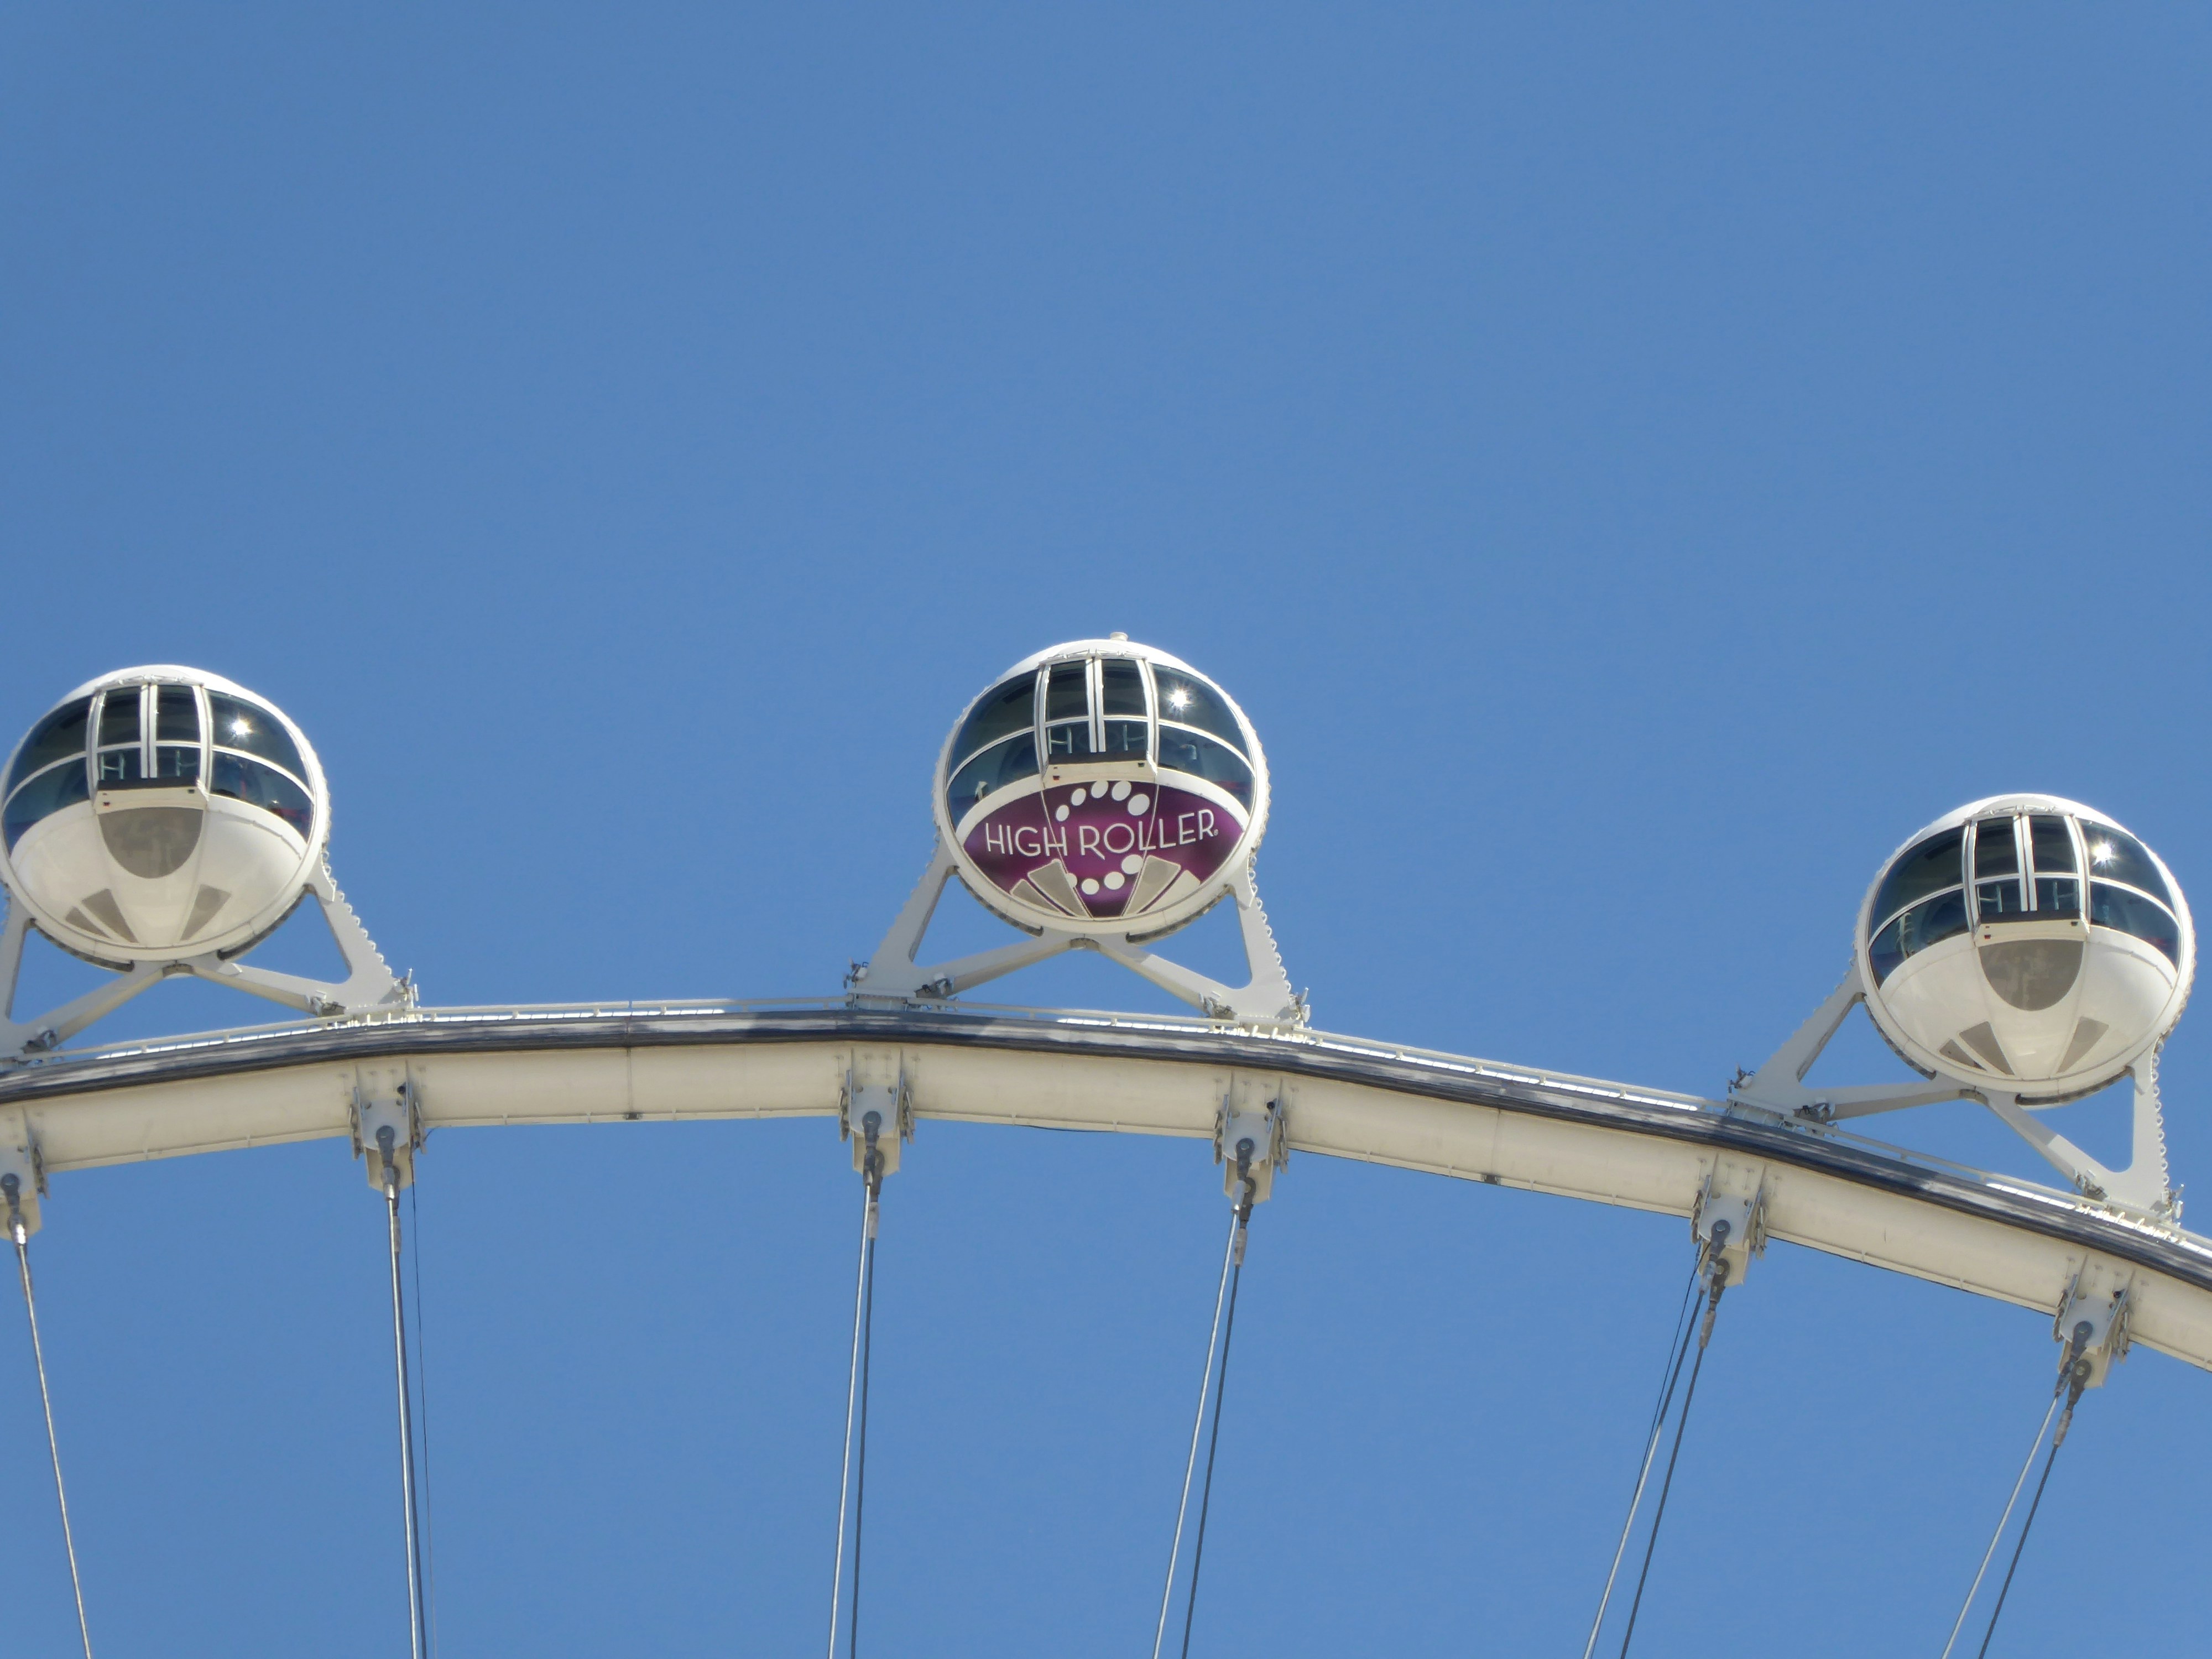 Nothing quite like a ride on the High Roller ride in Las Vegas. The views from when you reach the top incredible